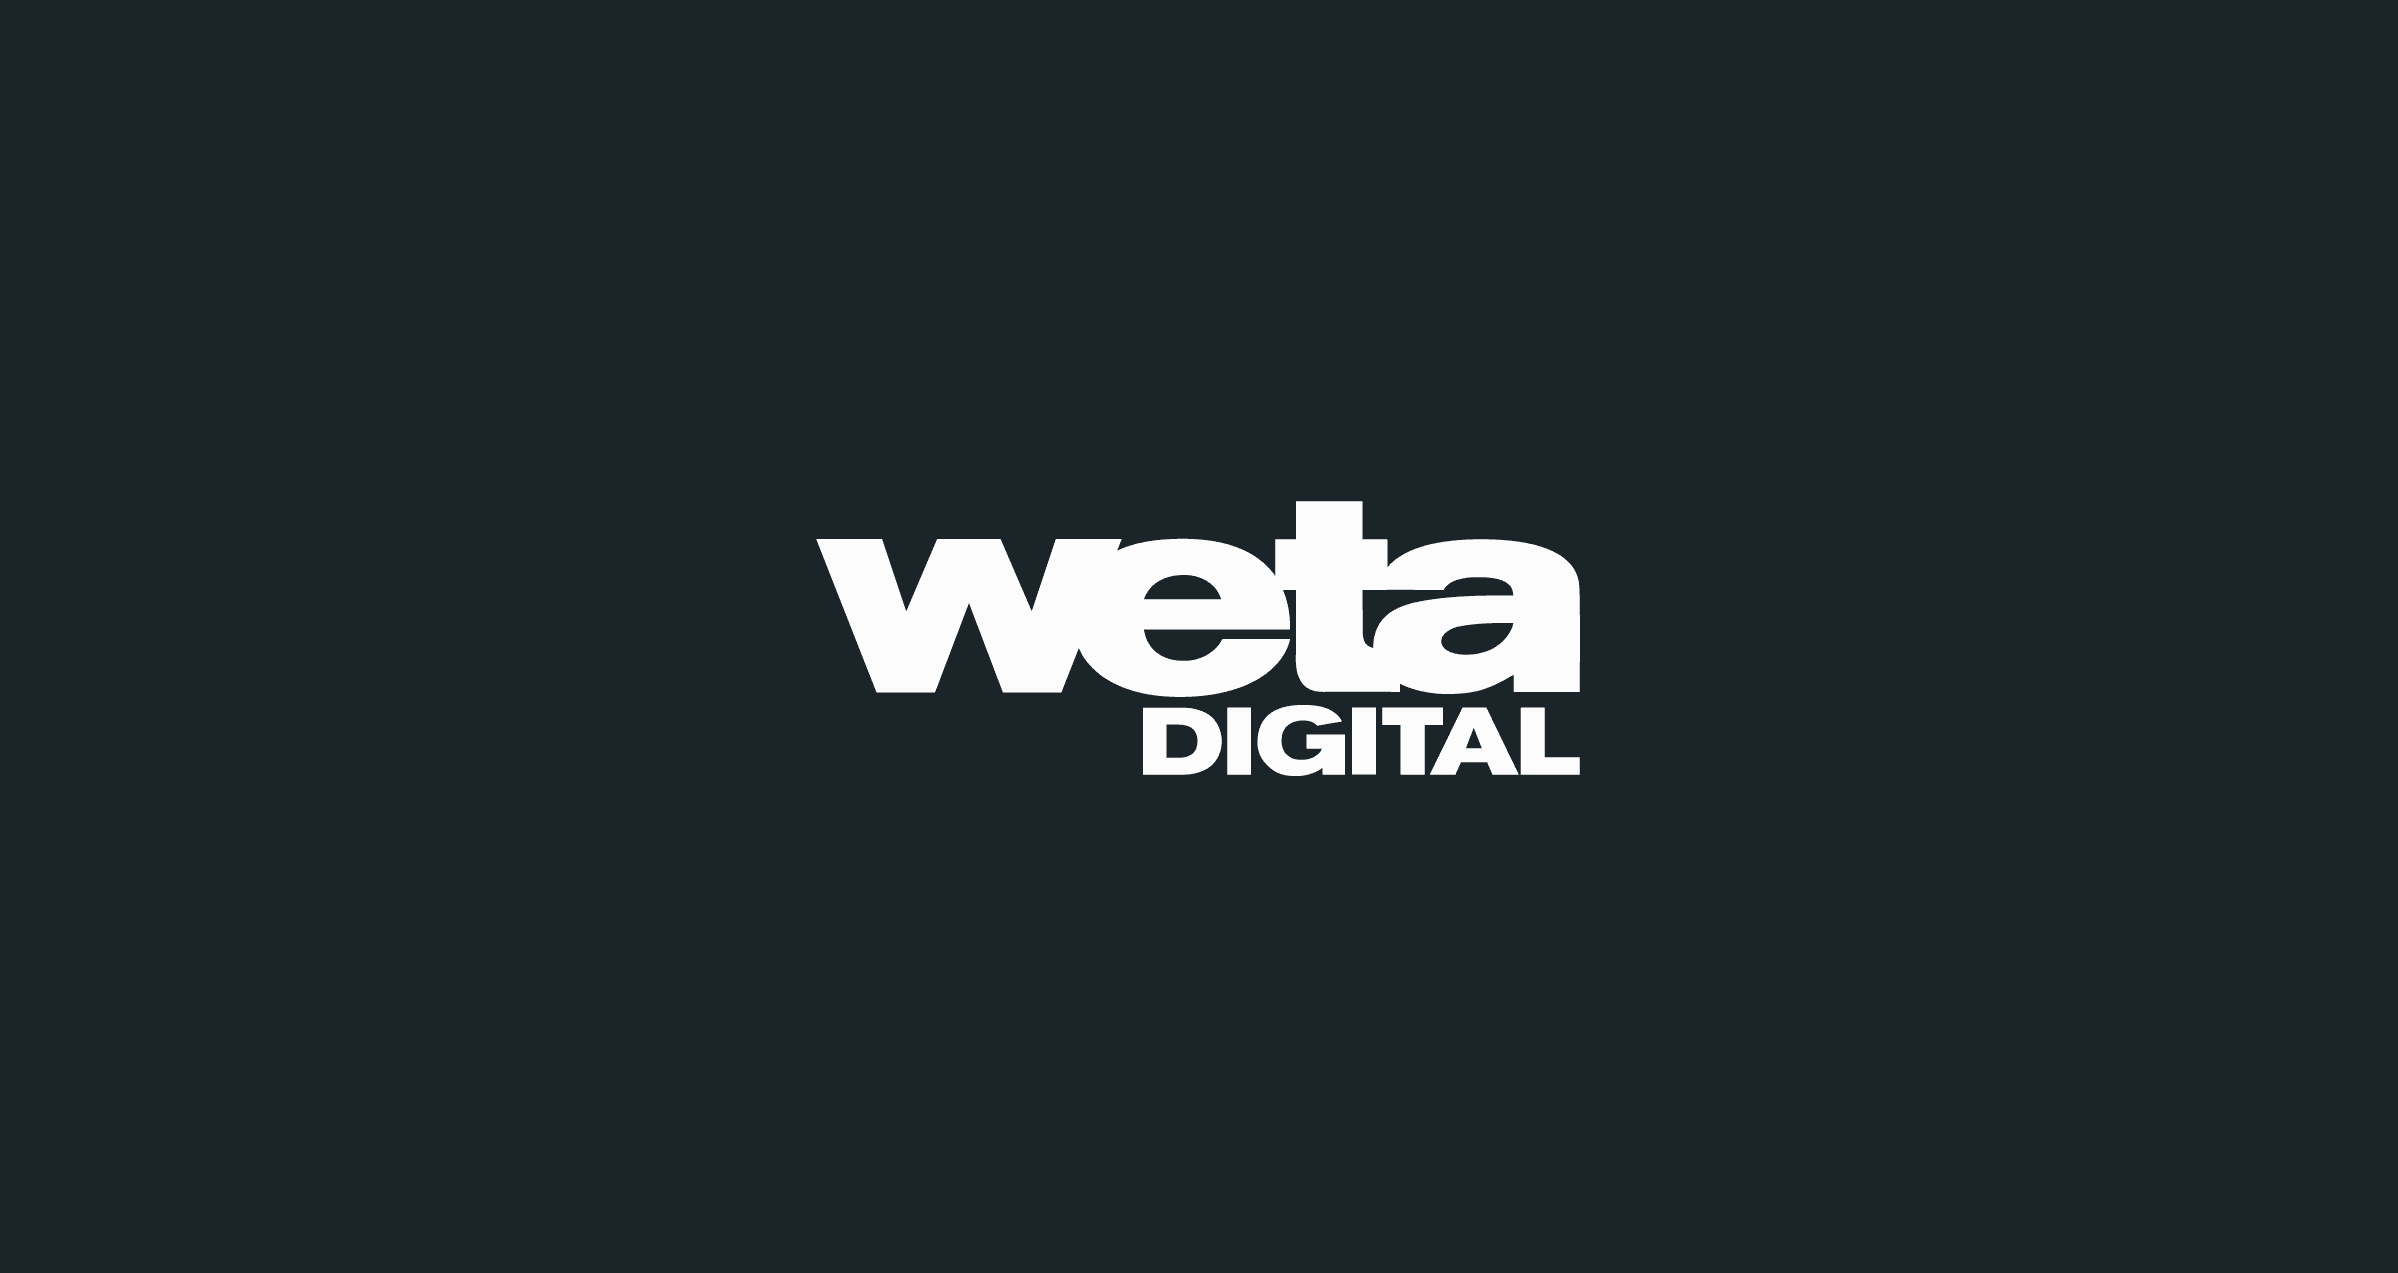 Win a fully paid Internship at Weta Digital - one of the world’s premier visual effects companies.